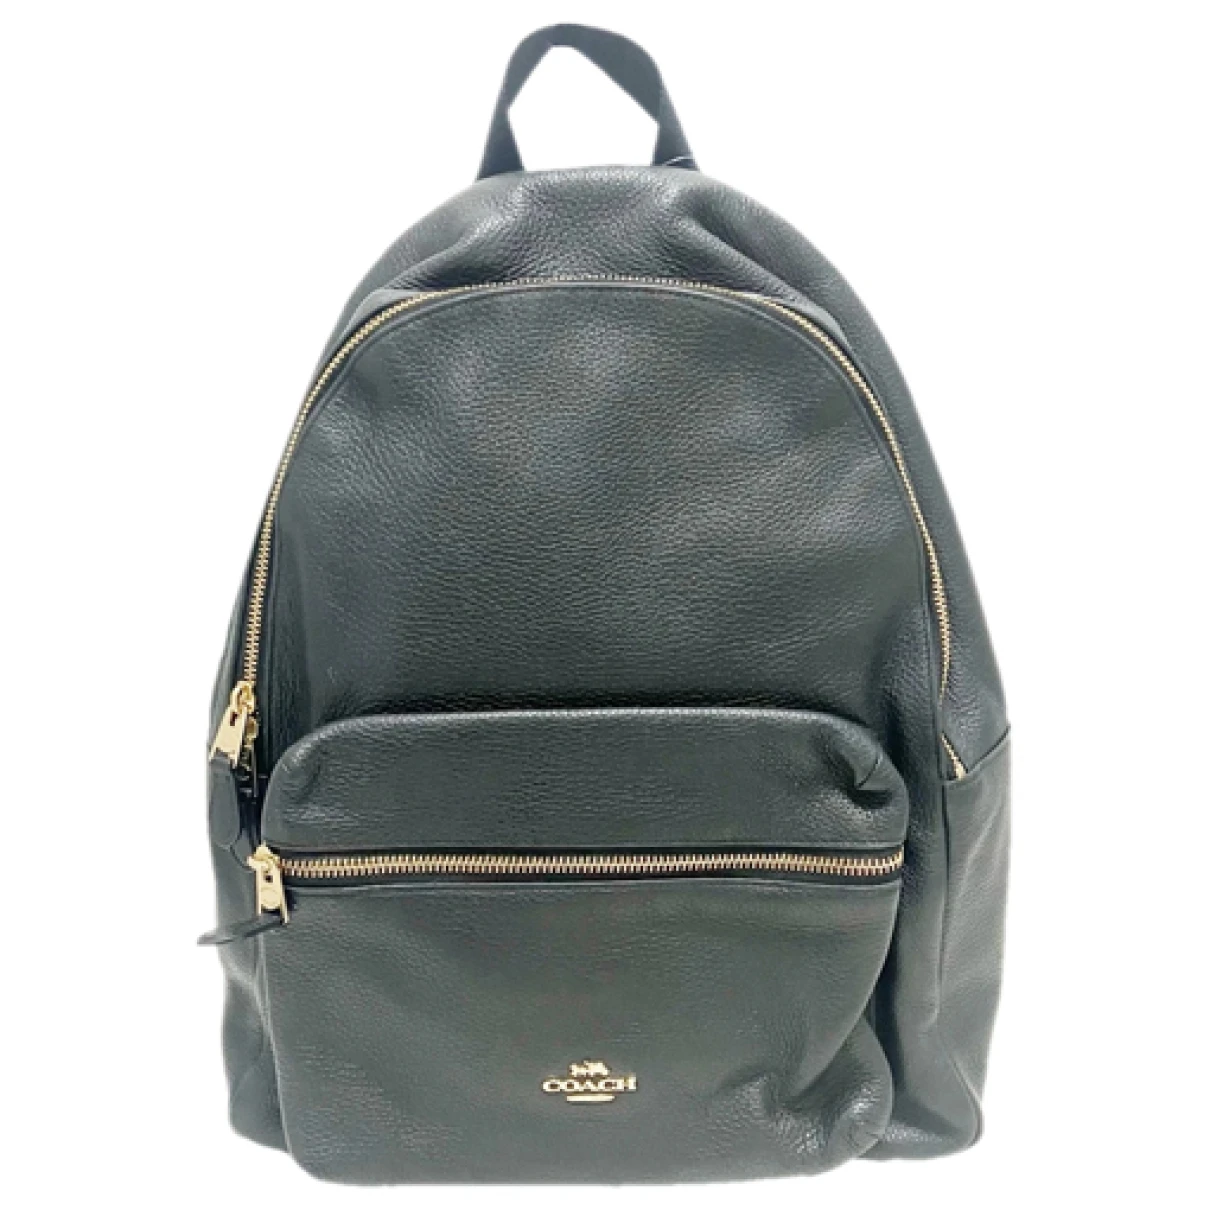 Pre-owned Coach Leather Backpack In Black